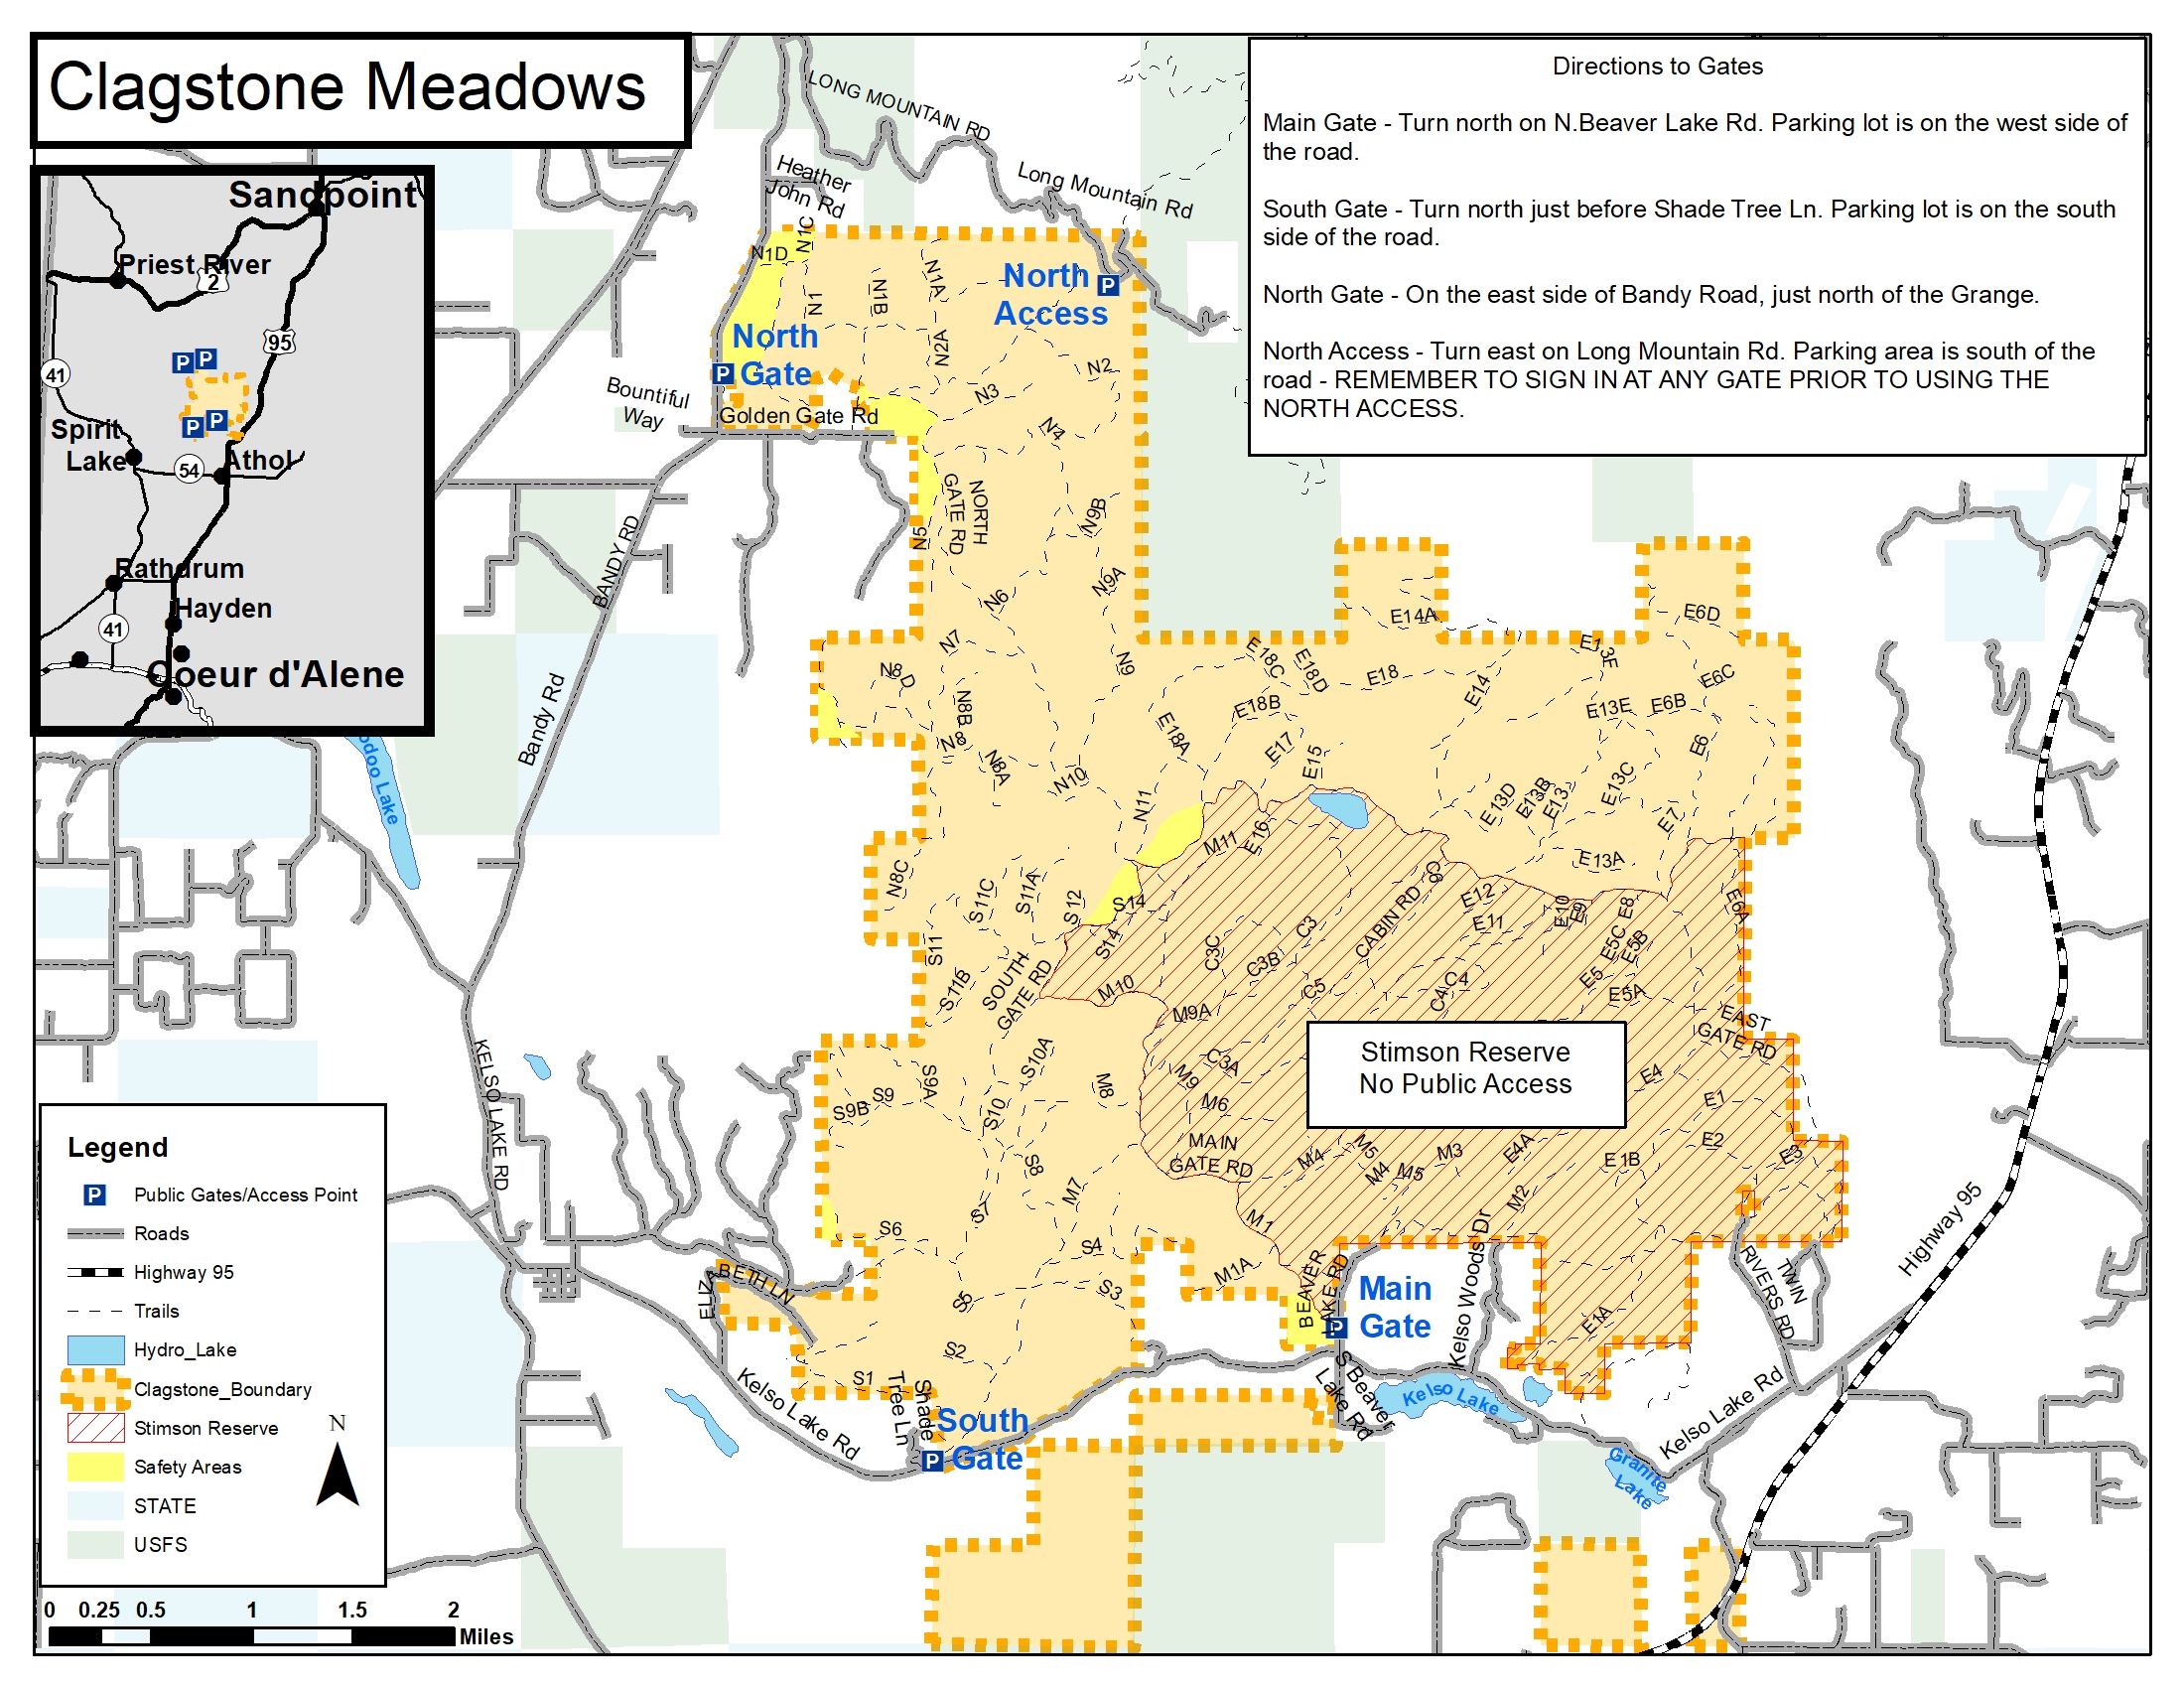 Access Map for Clagstone Meadows